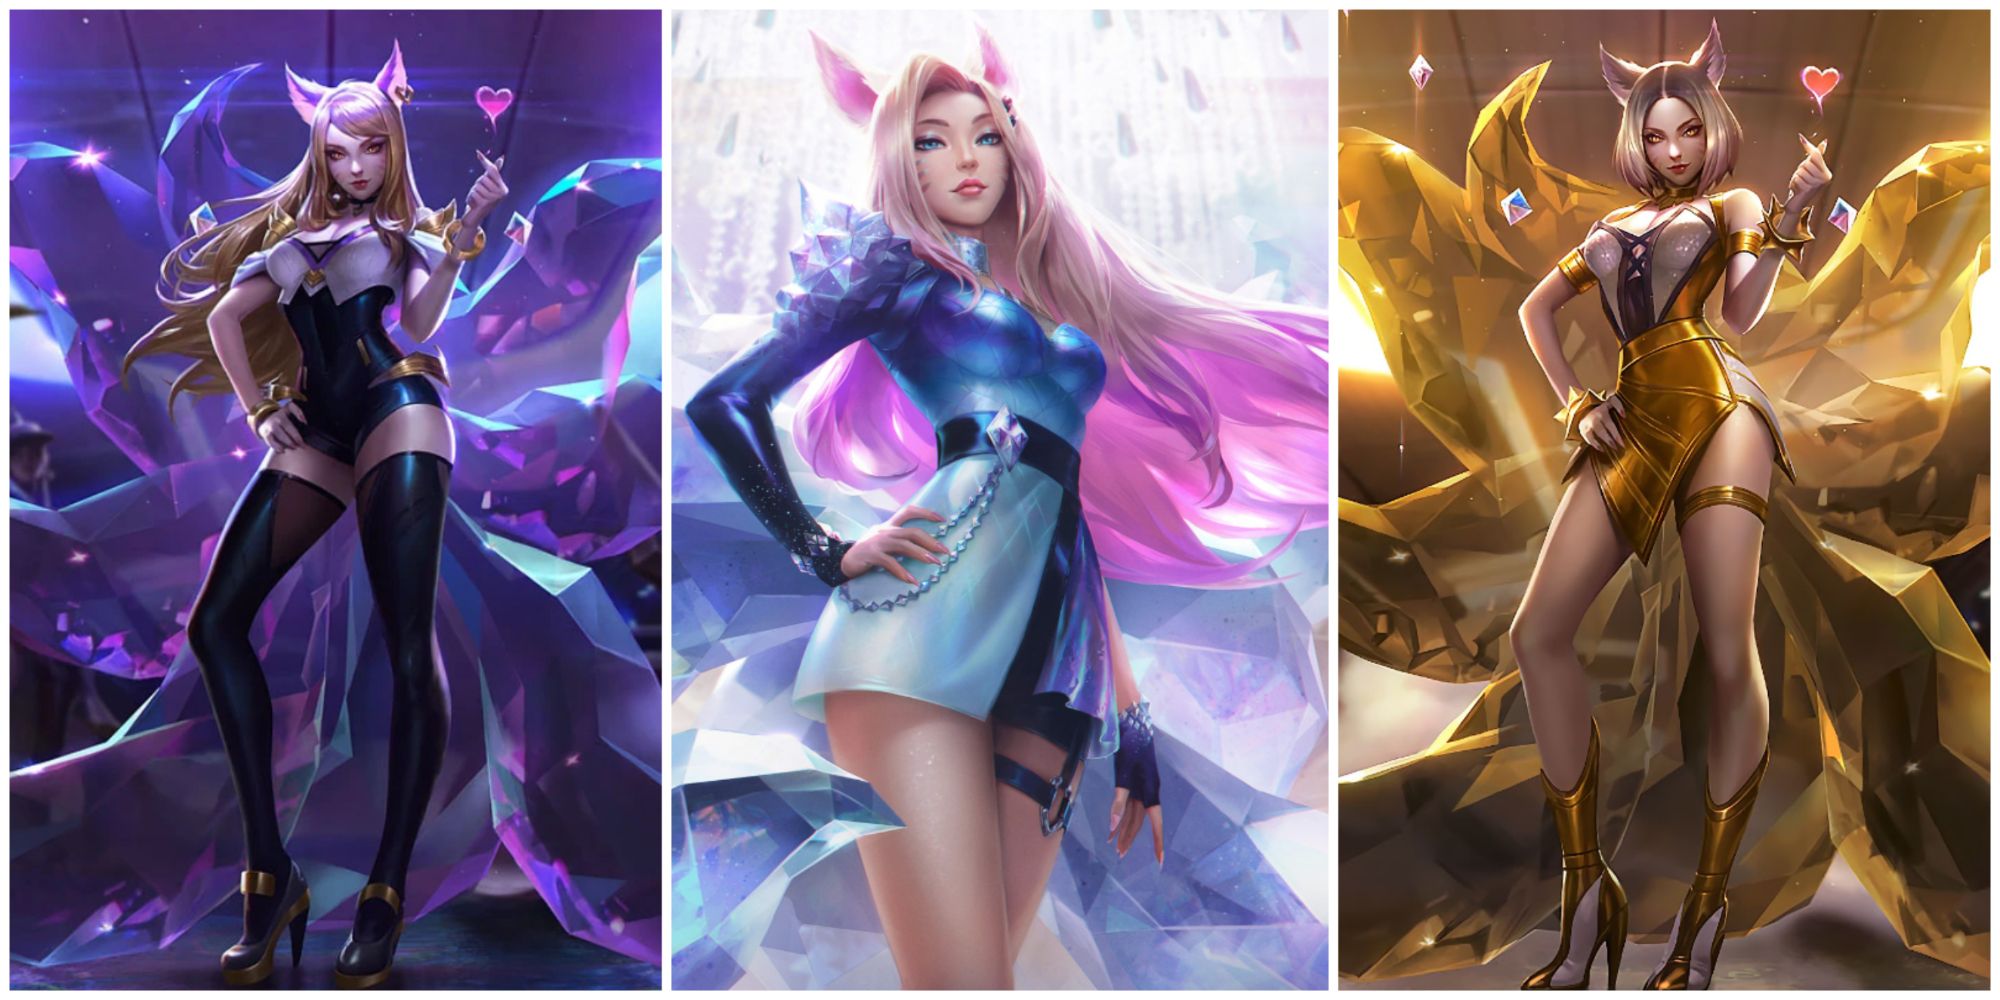 KDA Ahri posing in her POP/STARS and ALL OUT skins both base and prestige, very sparkly and shiny as she makes a heart